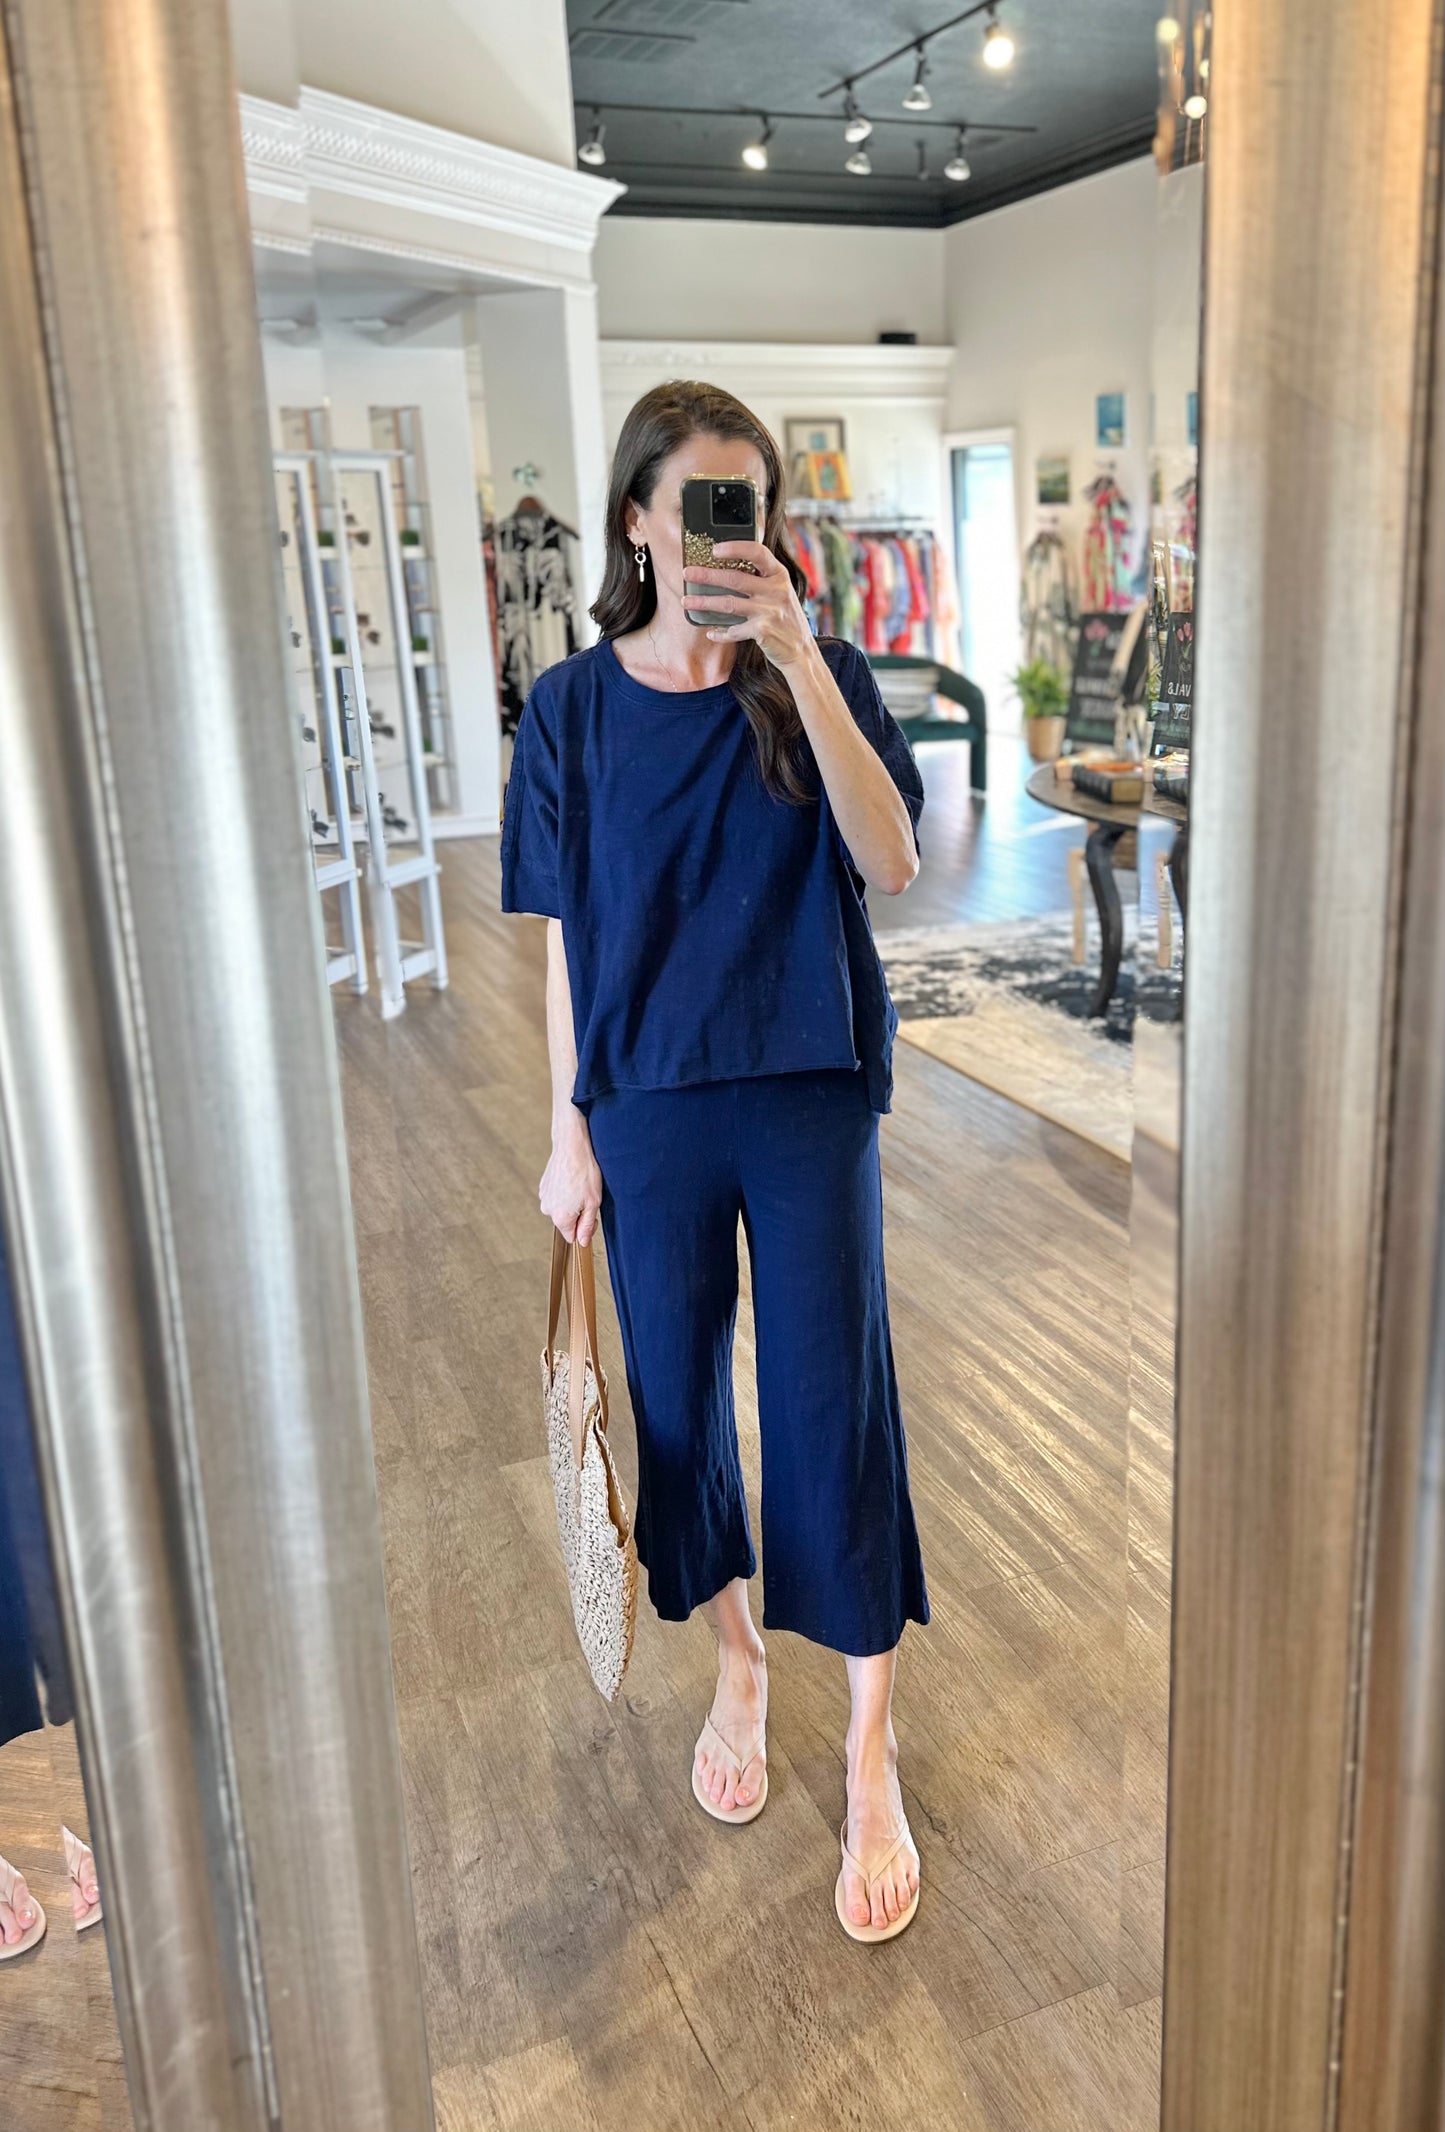 Wide Leg Cropped Pants in navy licorice by Mododoc